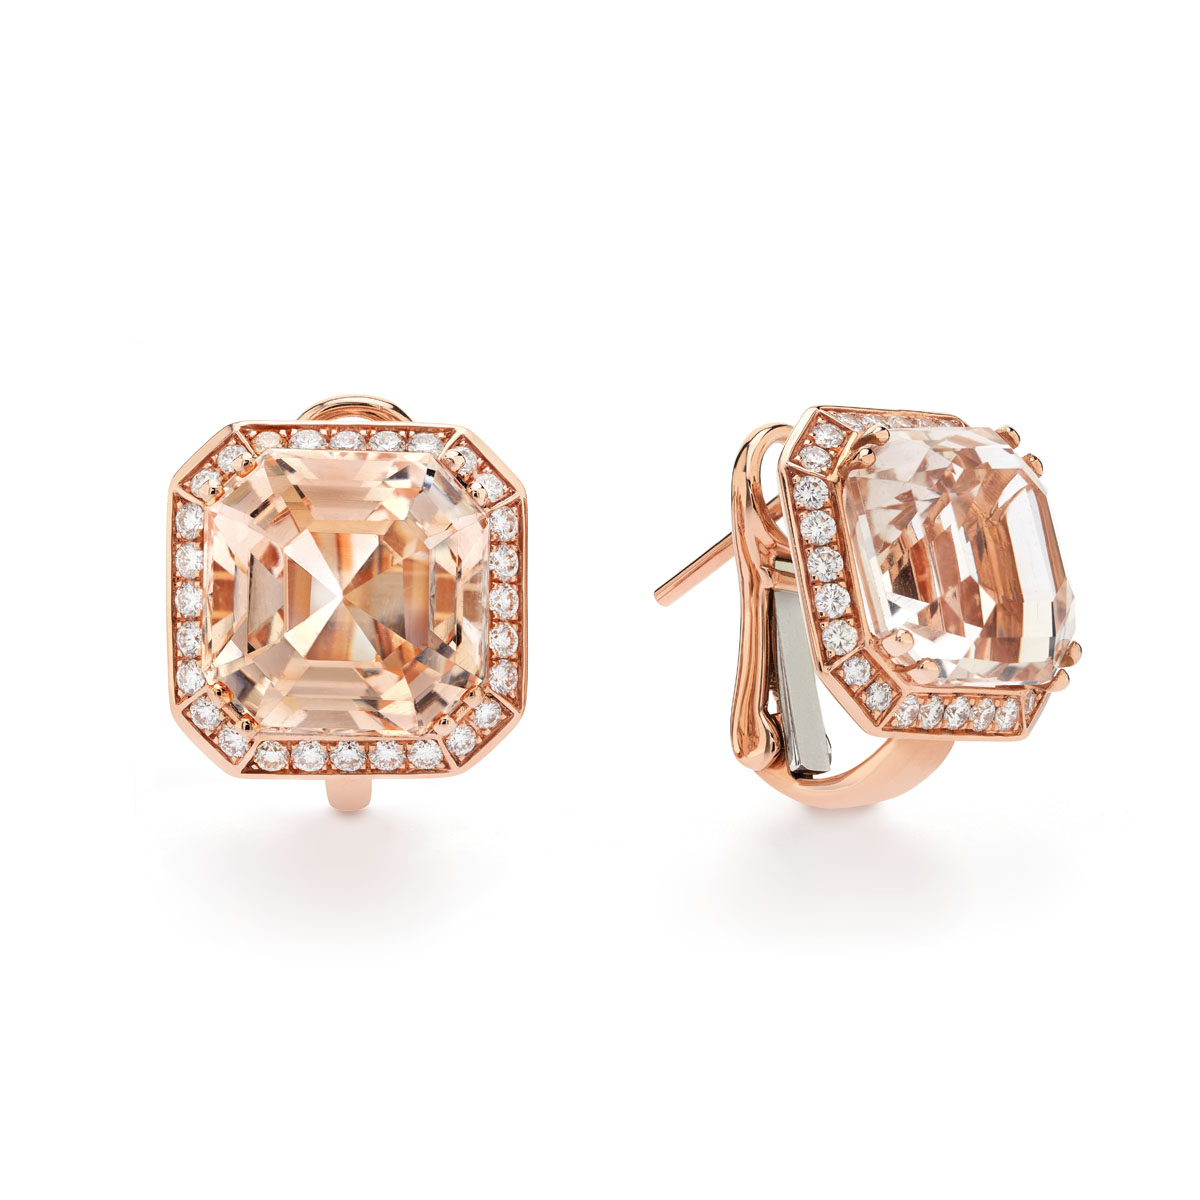 A pair of earrings set with 16.25ct octagonal cut natural light peachy-pink topaz in a 0.70ct diamond cluster in 18ct rose gold.